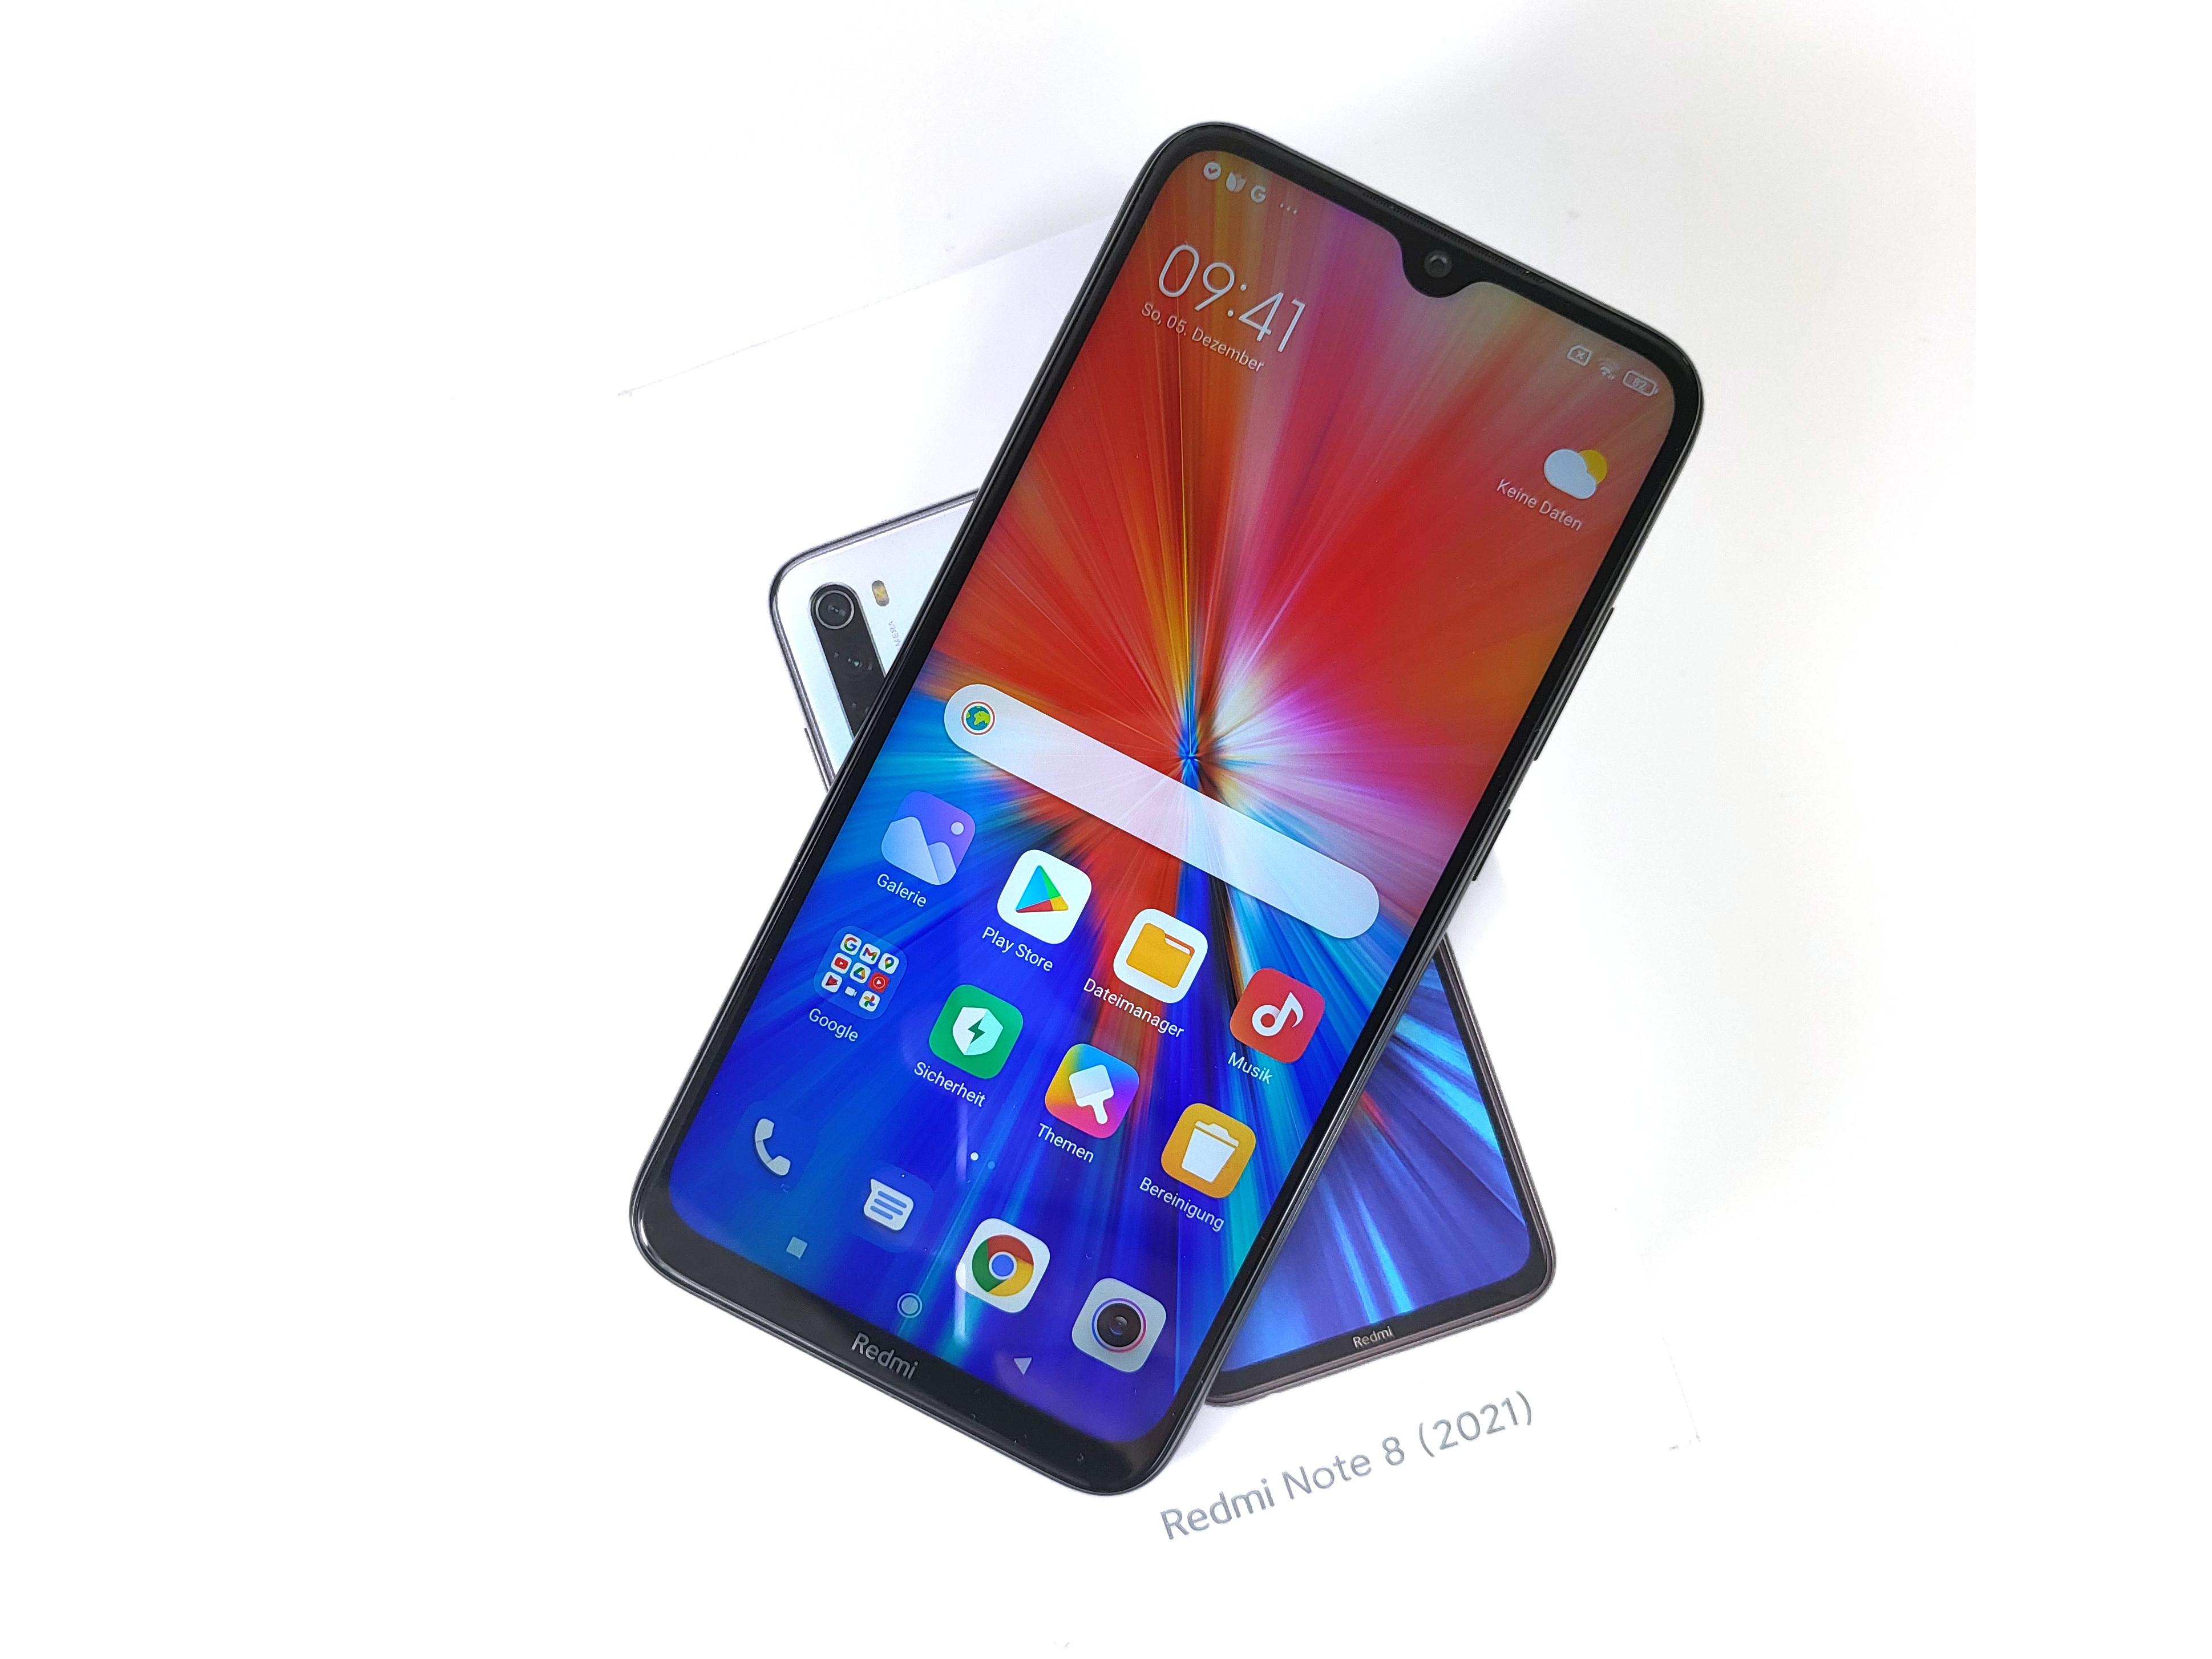 Top 5 reasons to BUY or NOT to buy the Xiaomi Redmi Note 8 (2021)